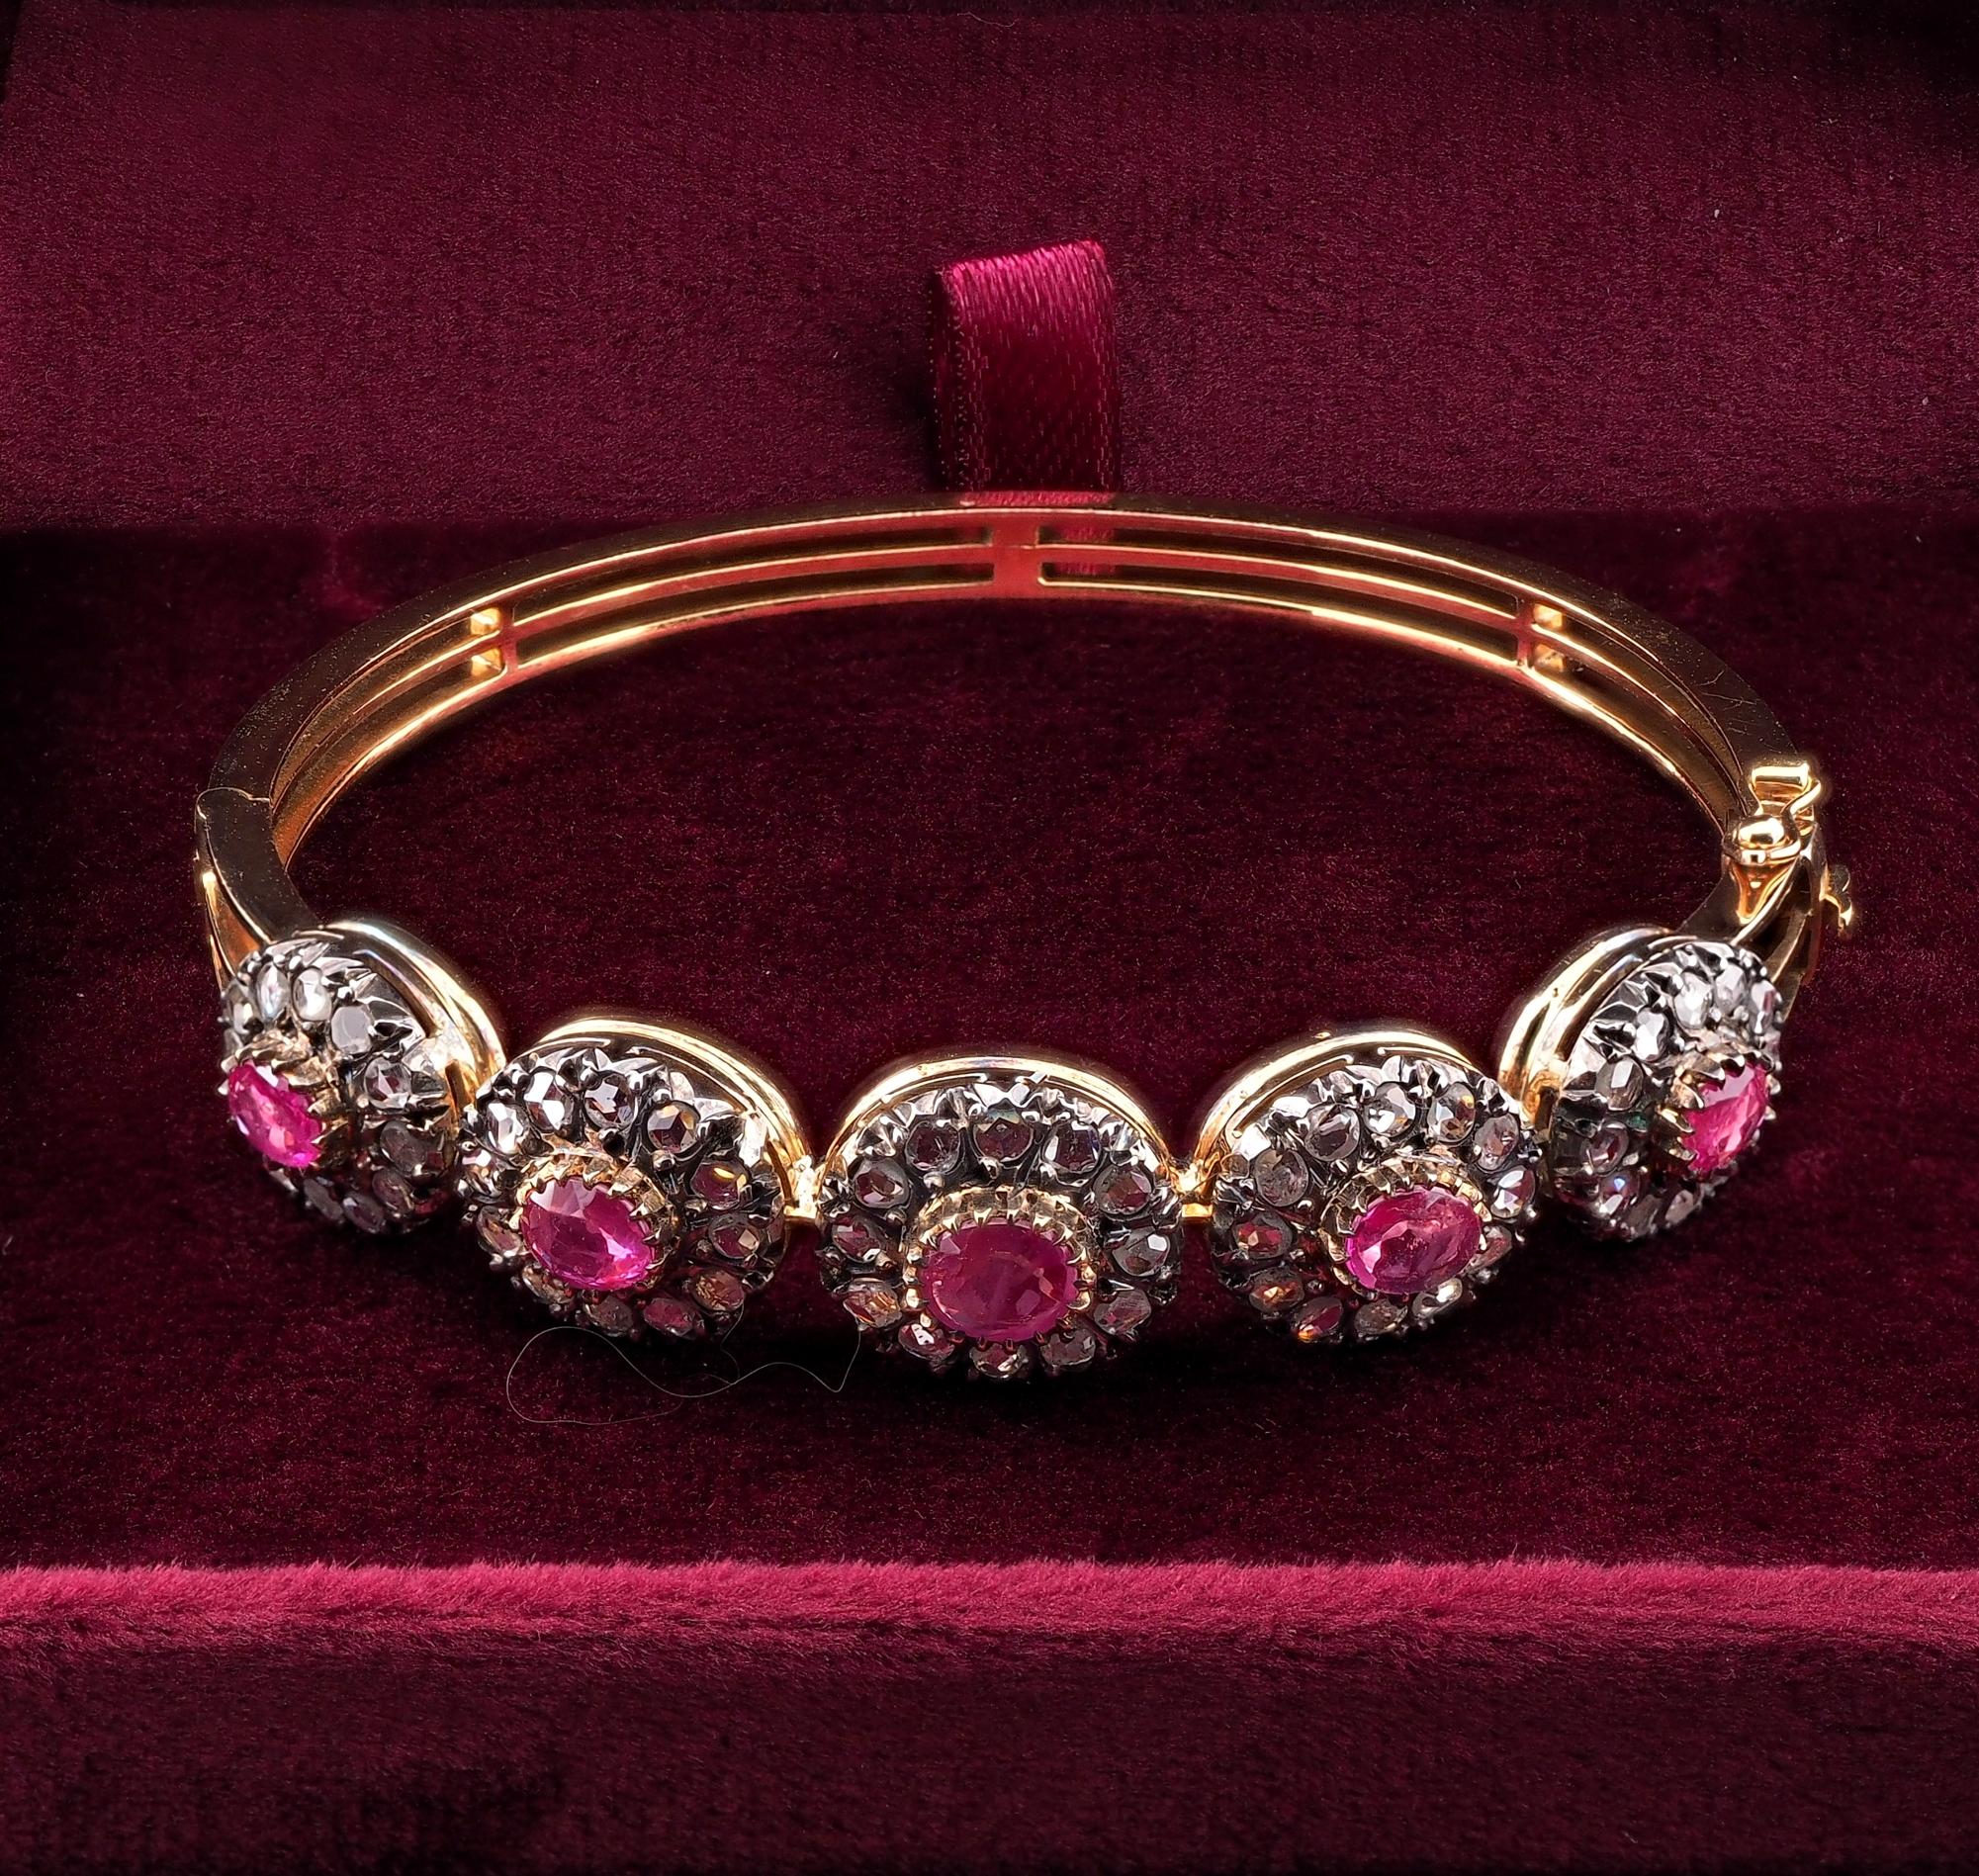 A gorgeous Diamond and Ruby rare bangle that is in the Victorian tradition, 1890 ca
Hand crafted of solid 18 Kt gold with portions of silver for the Diamond housing
Stunning riviere design of multiple Diamond and Ruby clusters composing an array of